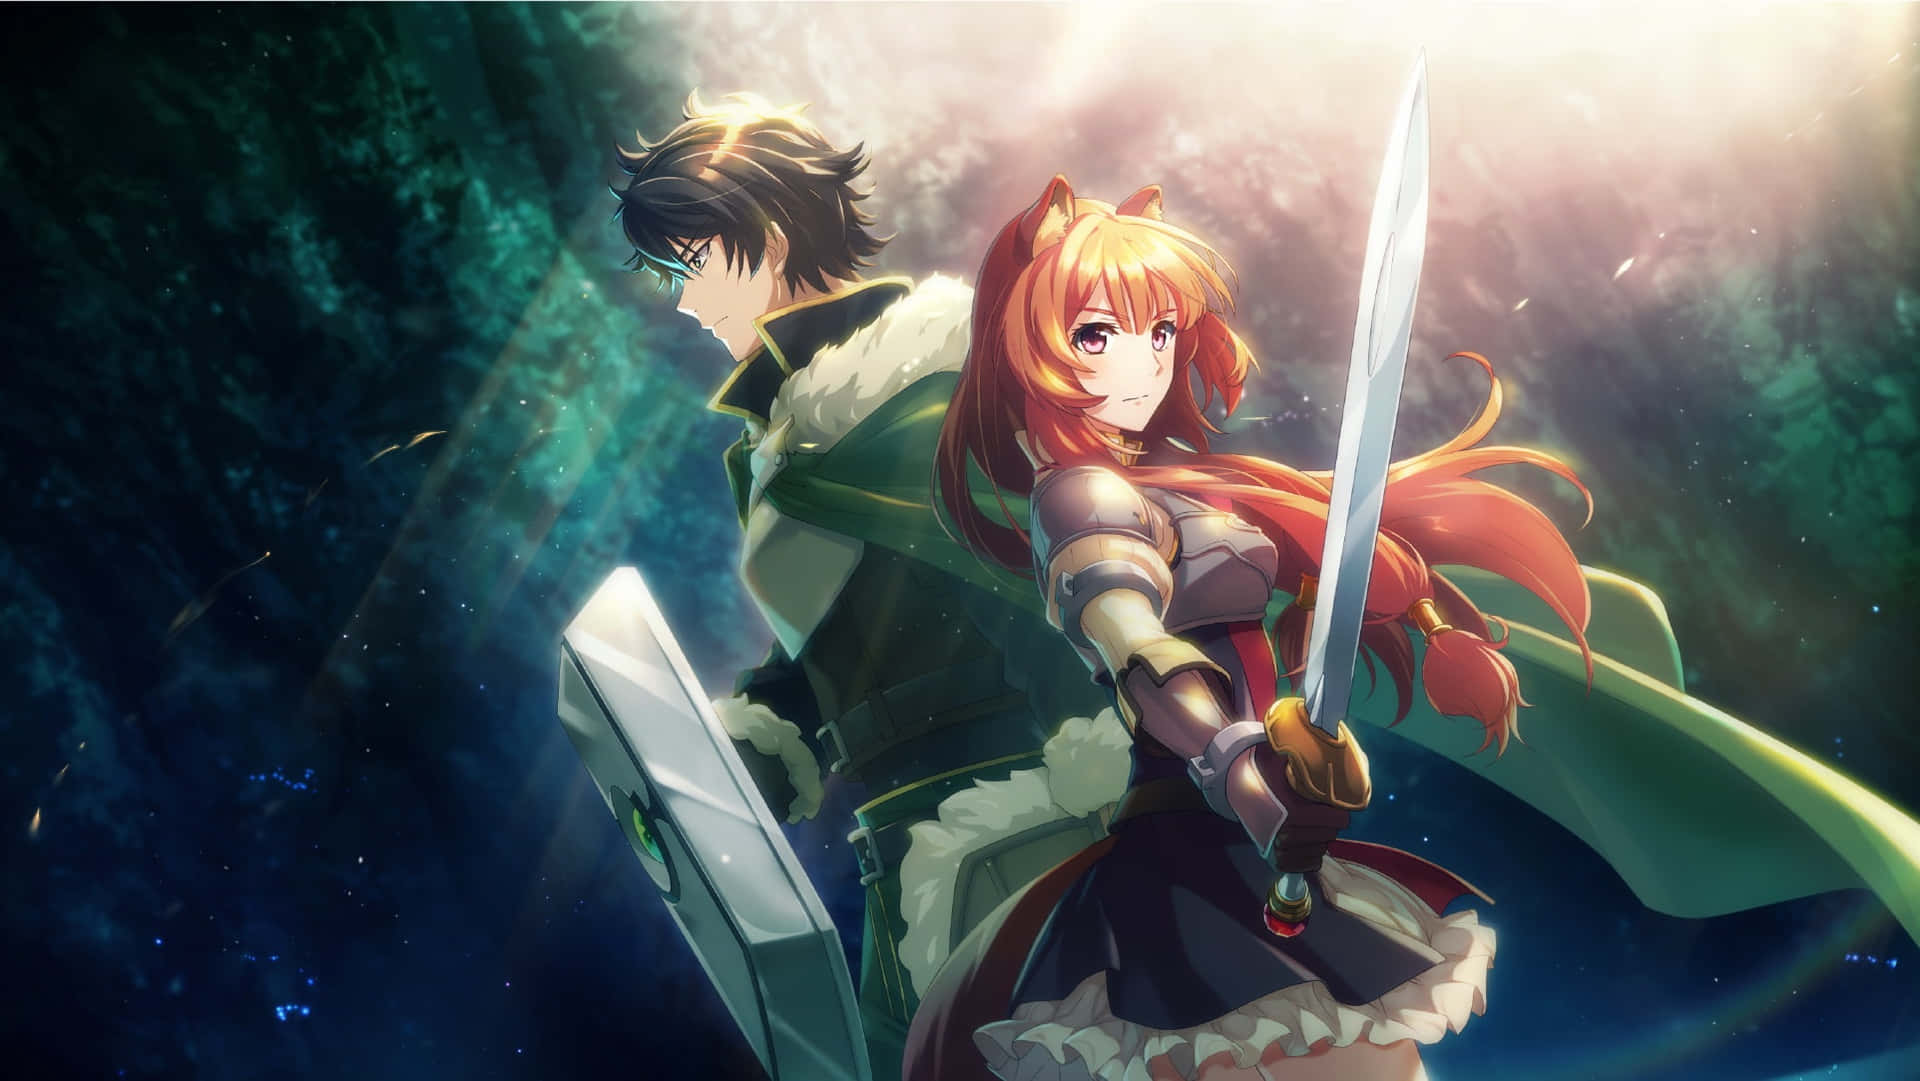 Join Eren and Naofumi in The Rising of the Shield Hero!